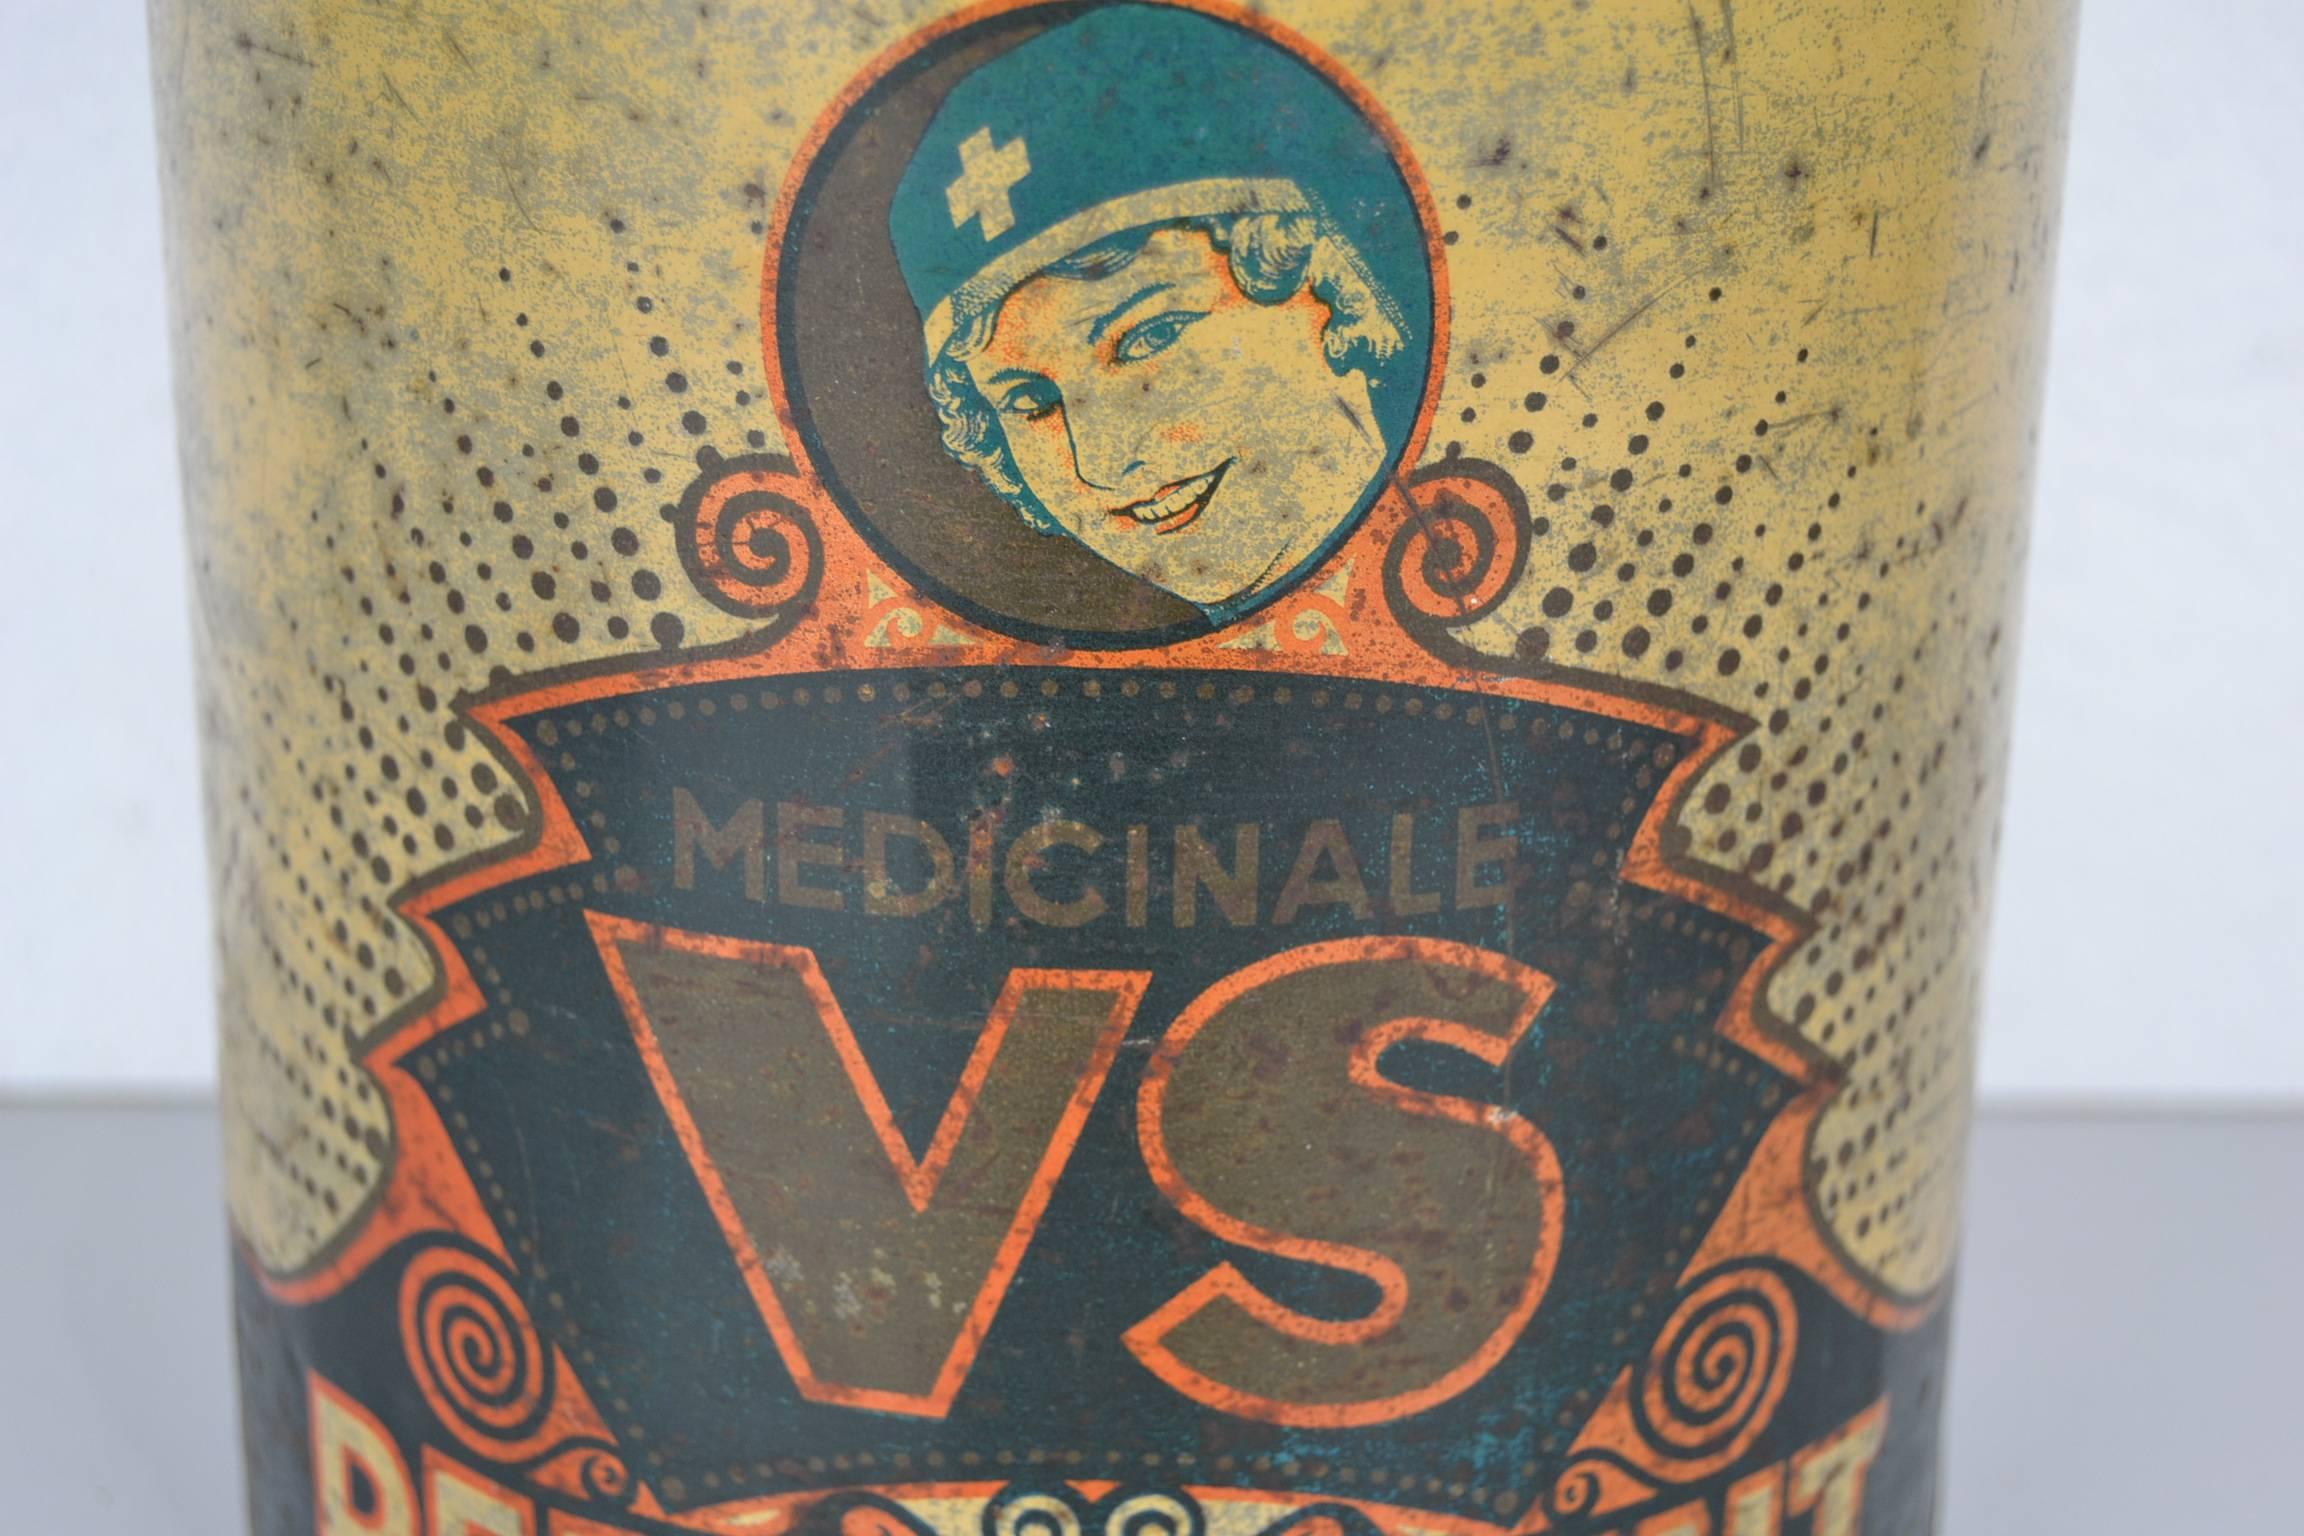 Awesome round antique decorative tin for medical Pepermint VS - Medicinale VS Pepermunt Holland. This tin was produced for the Company Van Slooten - Leeuwarden - Netherlands by Electro in the period 1930-1939, Art Deco.
Beautiful design with a lady